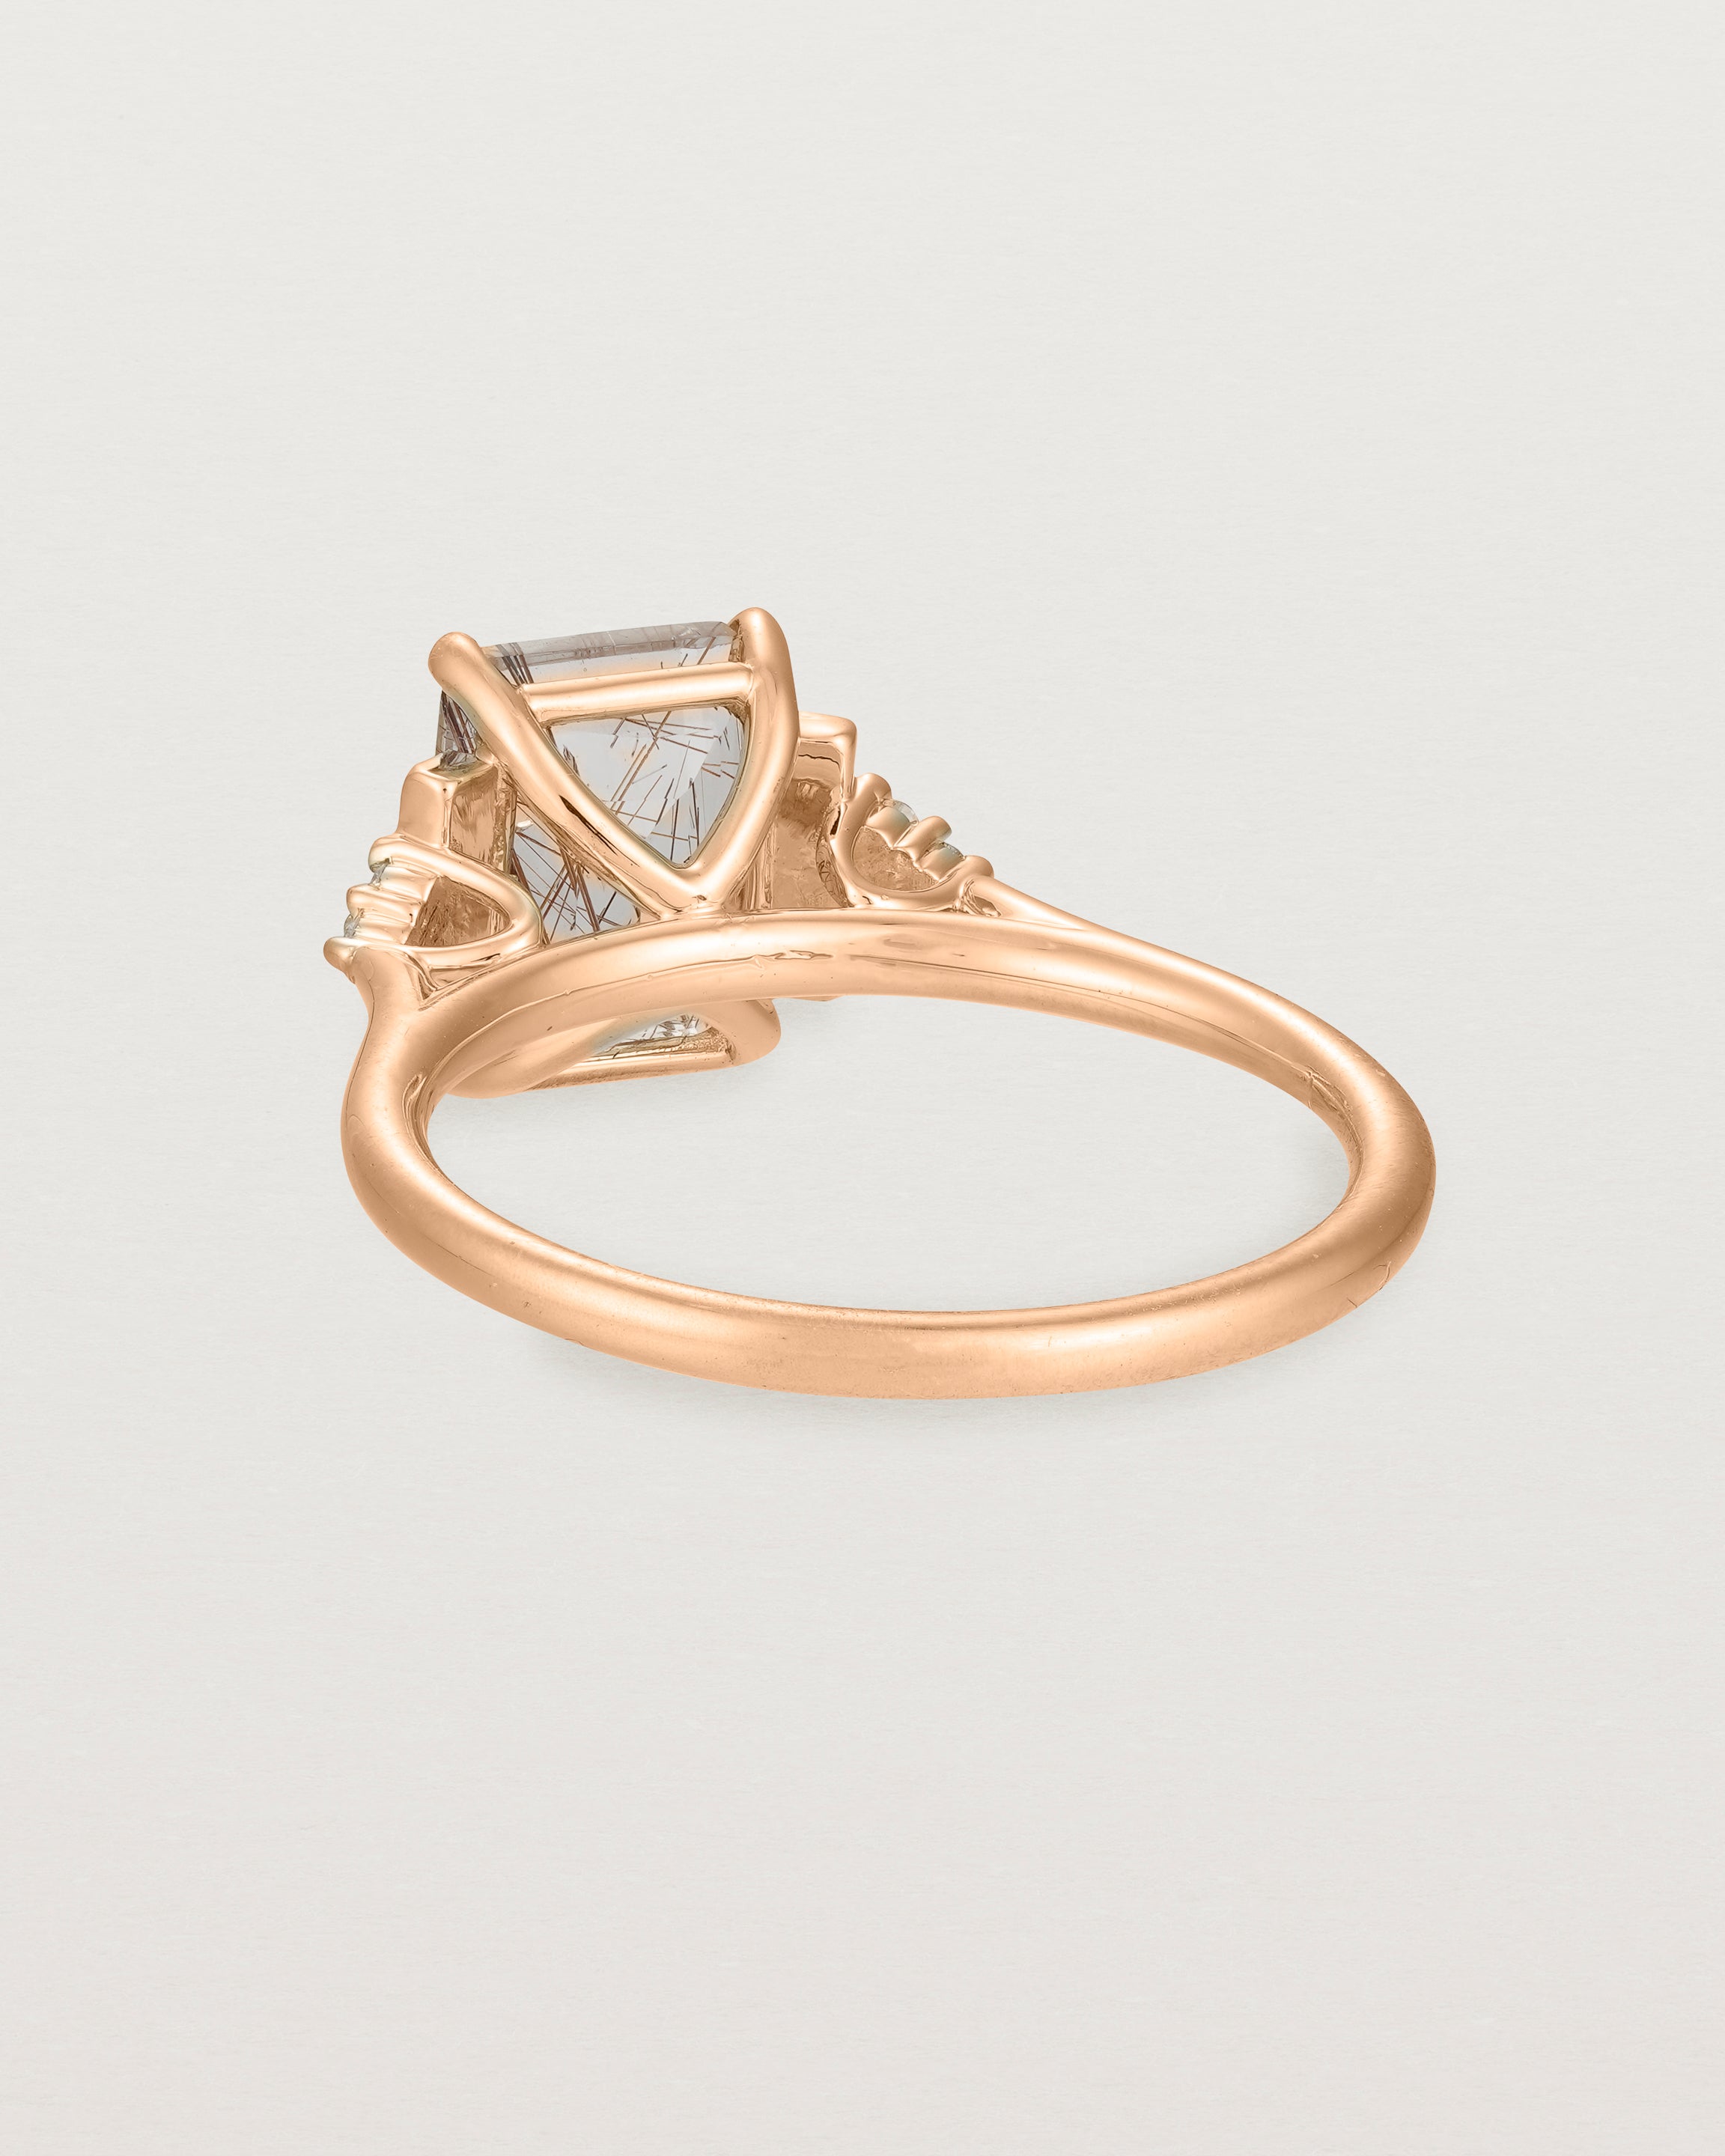 Back view of the Elodie Ring featuring a emerald cut rutilated quartz in yellow gold